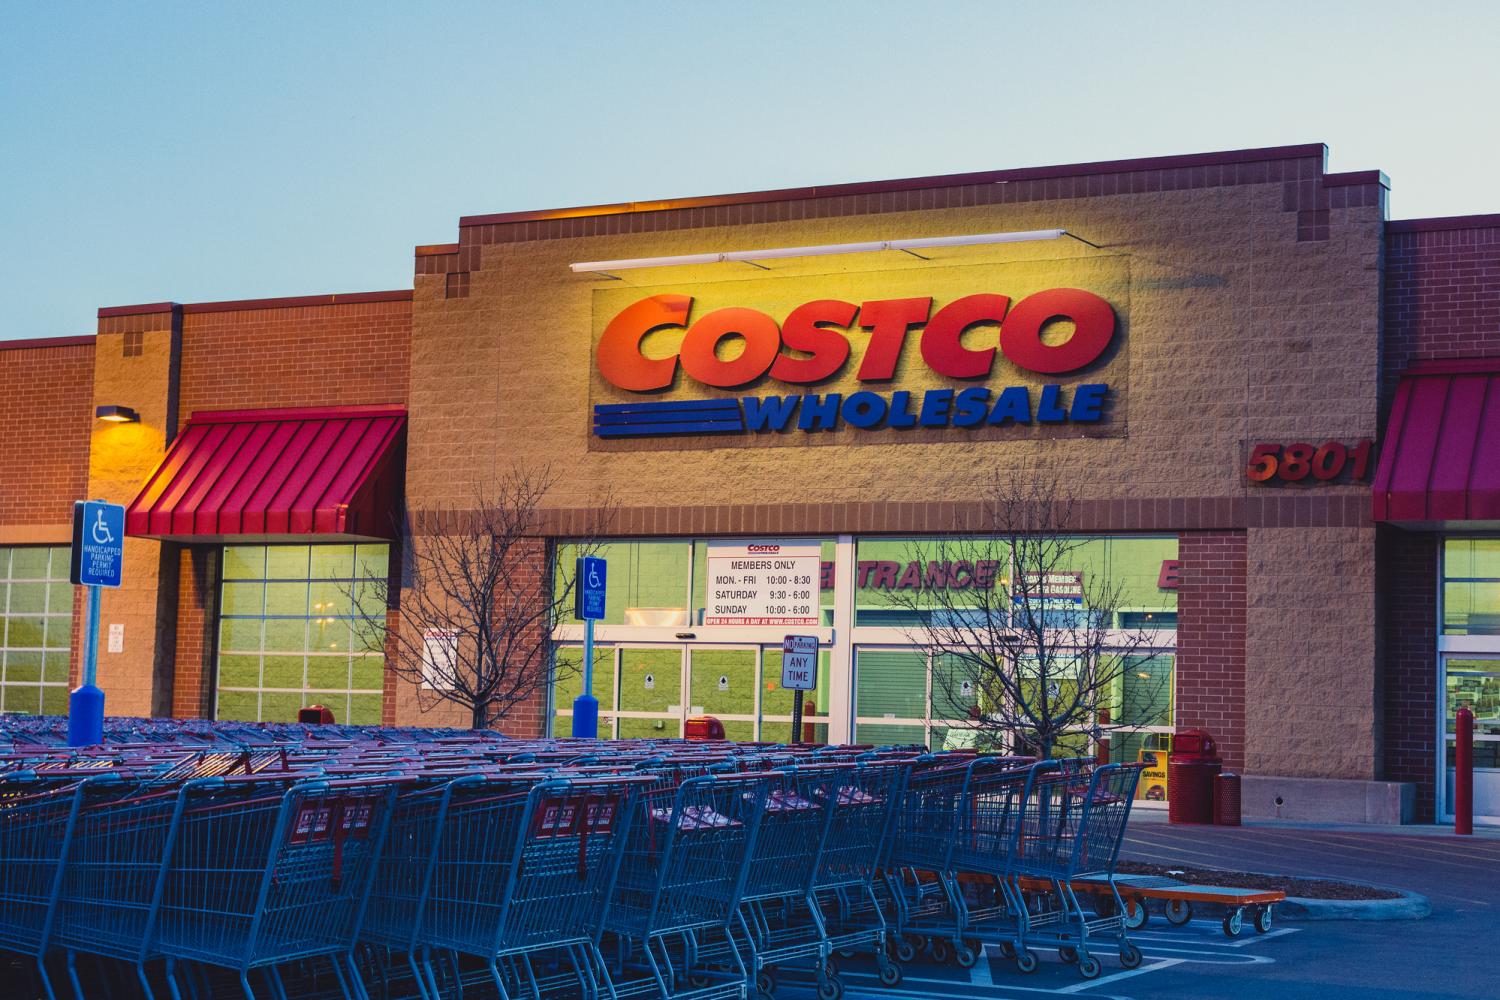 Costco is emerging as a CSR leader in the e-commerce sector; the fact its employees are treated well and as a result, feel happier, is part of the reason why.